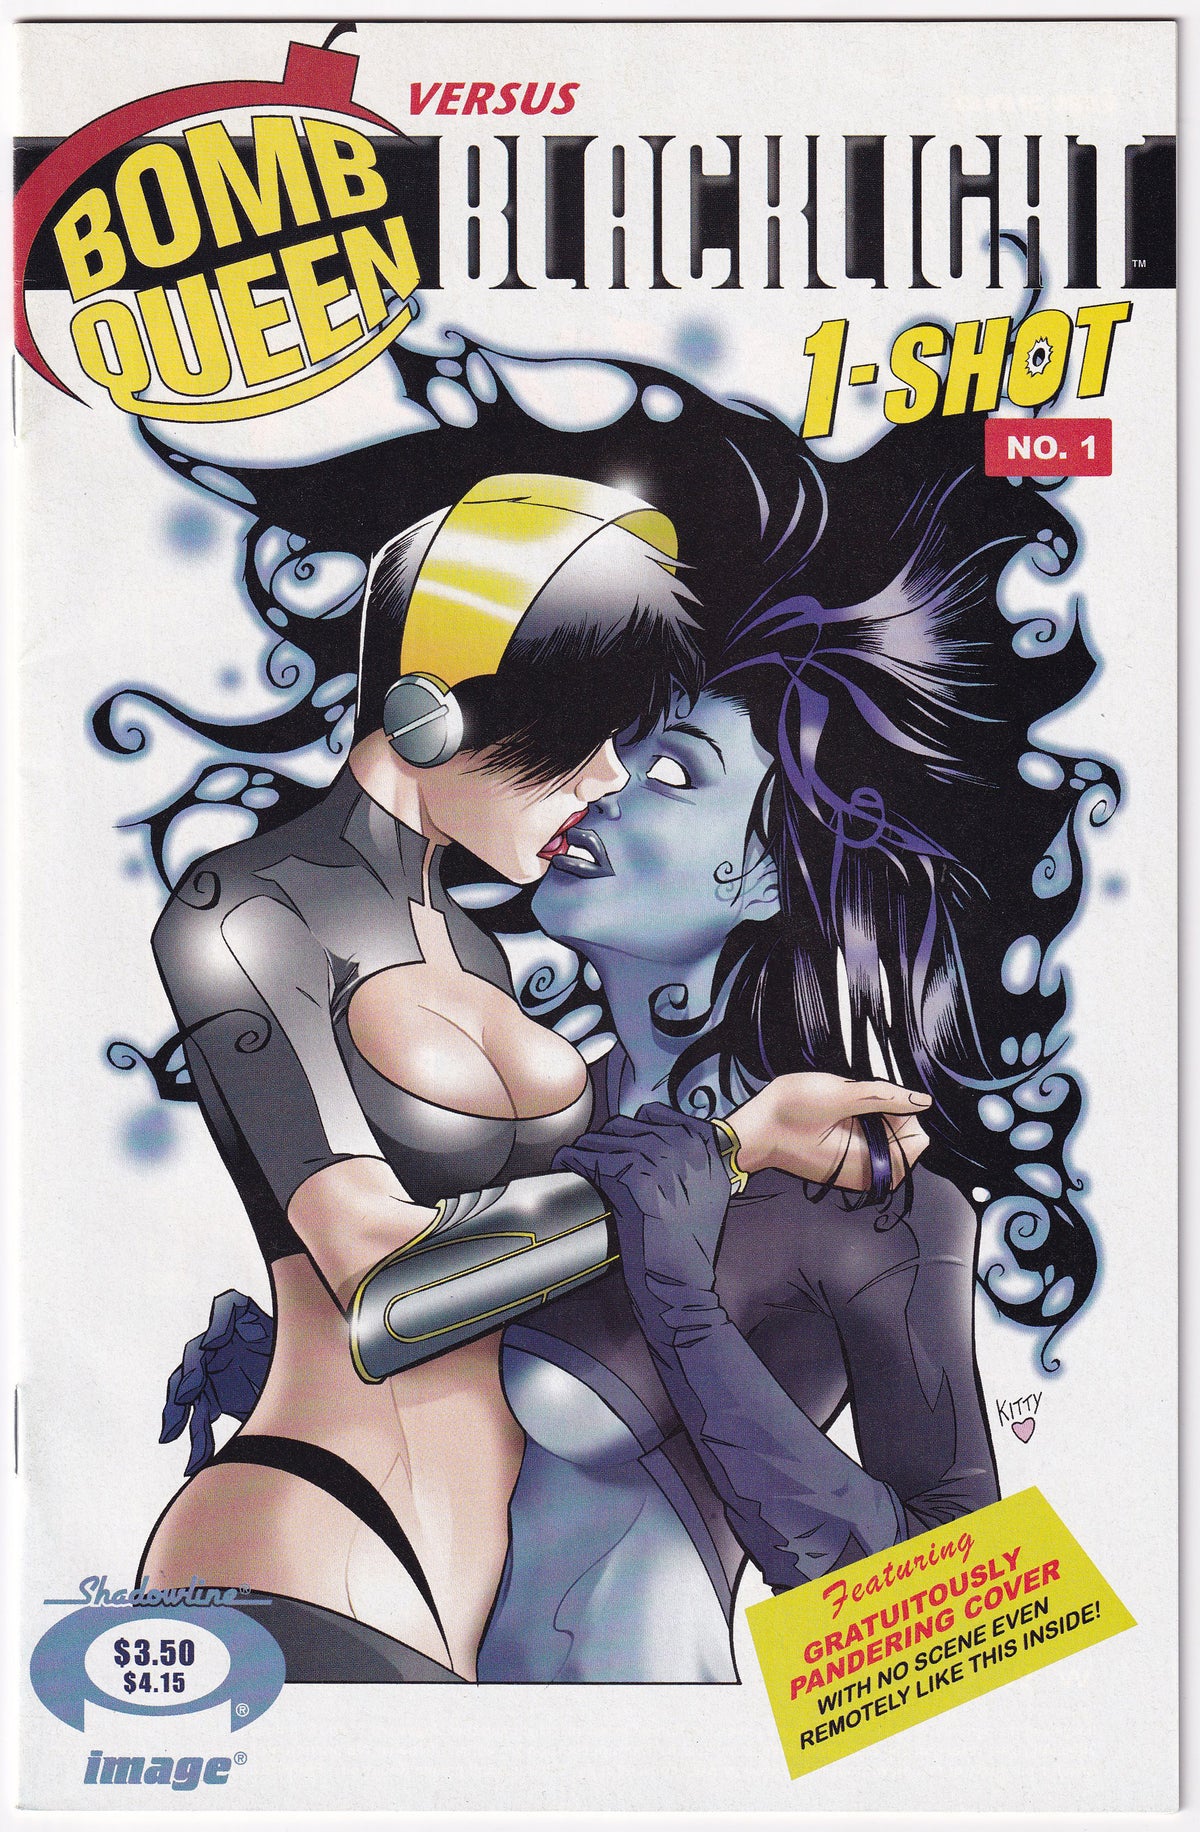 Photo of NM- Bomb Queen Versus Blackli (06) 1 Scott Wherle, Jimmie Robinson Comic sold by Stronghold Collectibles